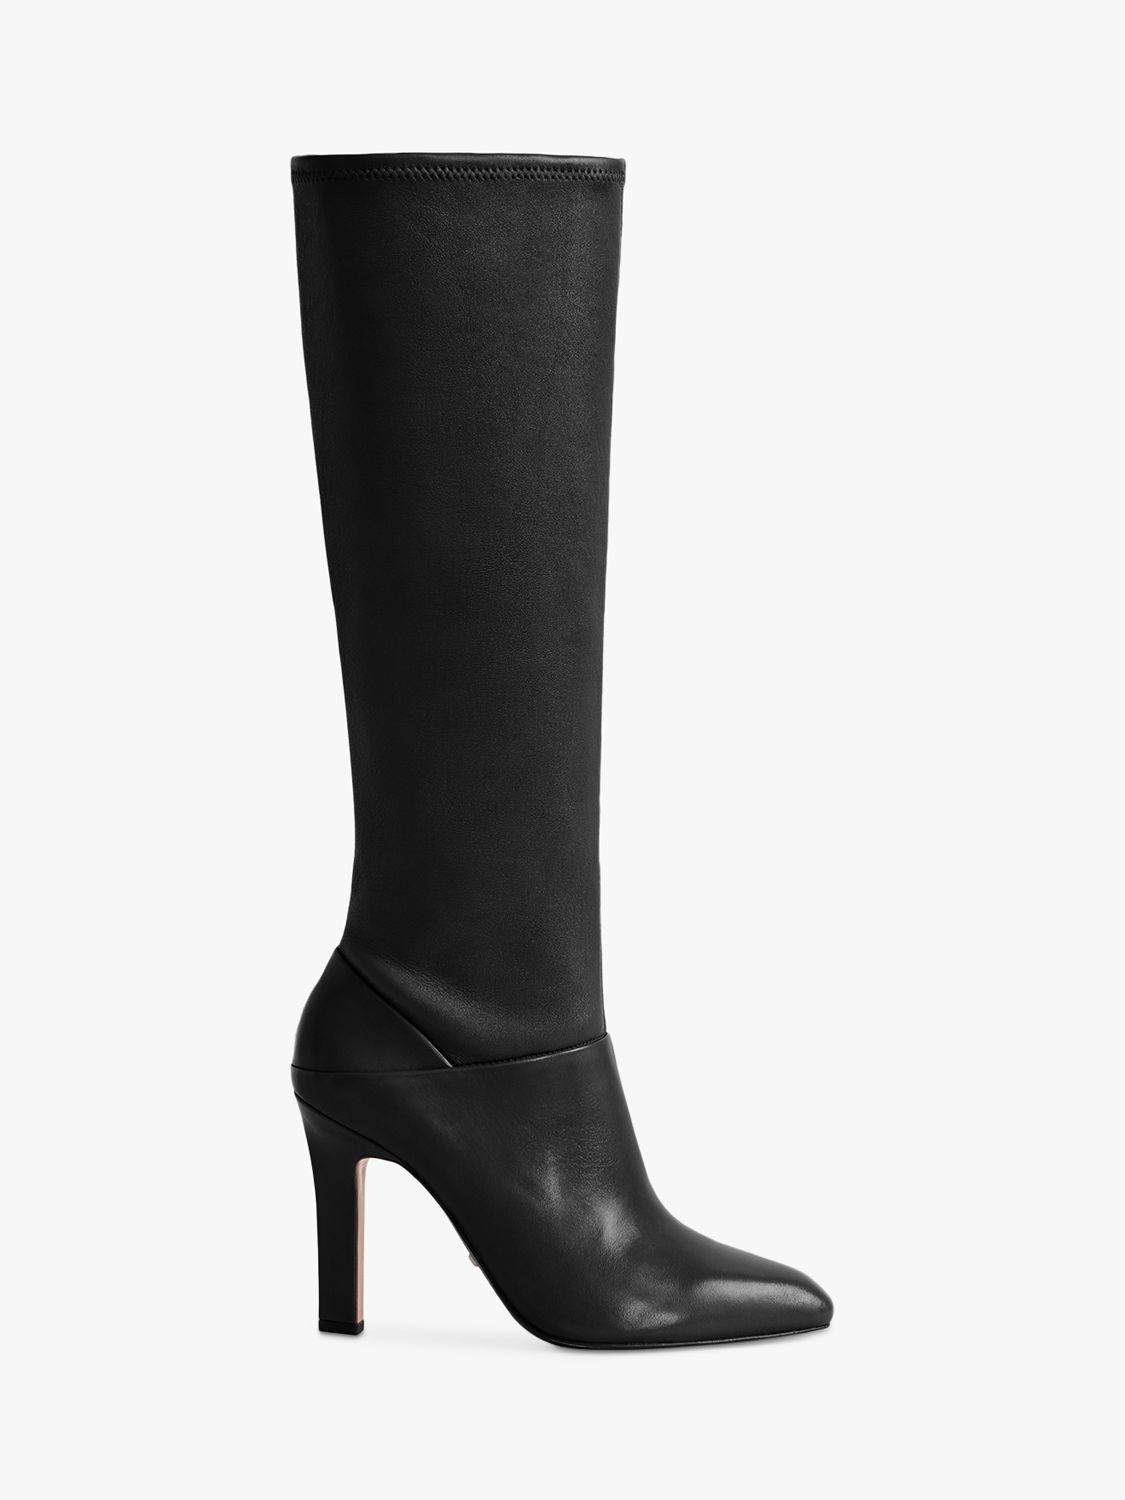 Reiss Cressida Leather Knee High Boots, Black at John Lewis & Partners